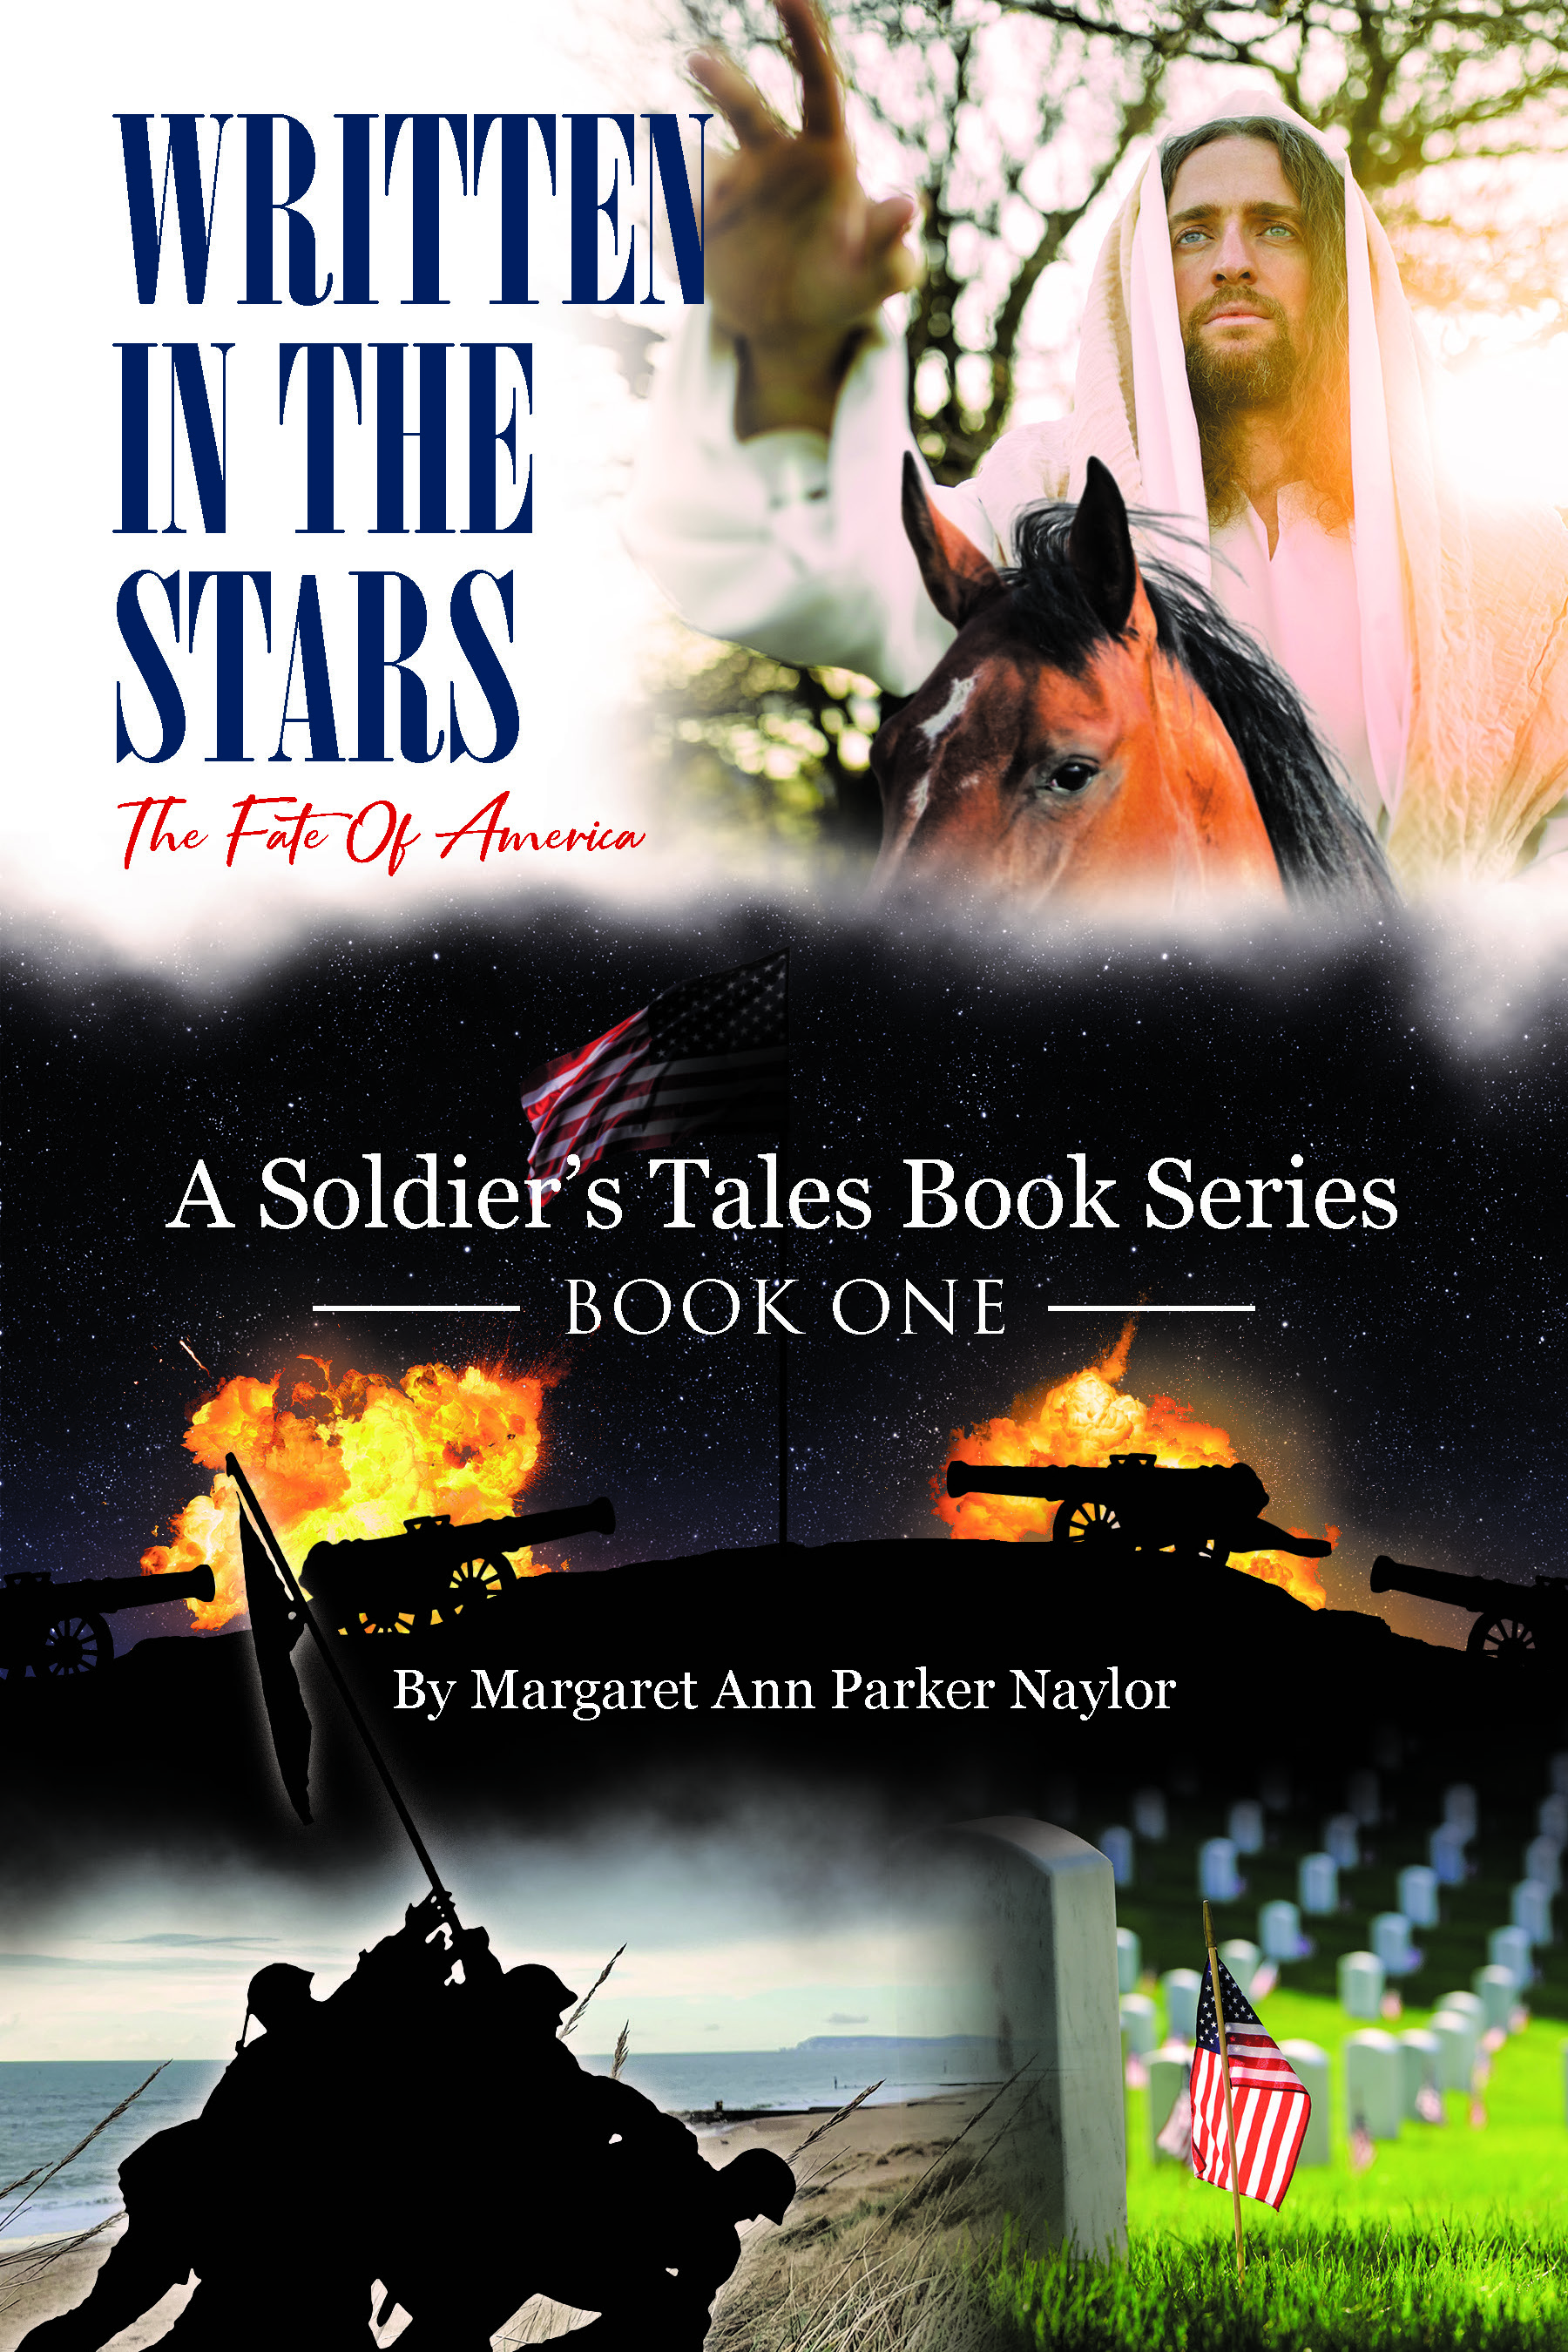 Author Margaret Ann Parker Naylor’s New Book, "Written in the Stars," Explores America’s Past and Possible Future Based on Historical Accounts and Biblical Prophecy